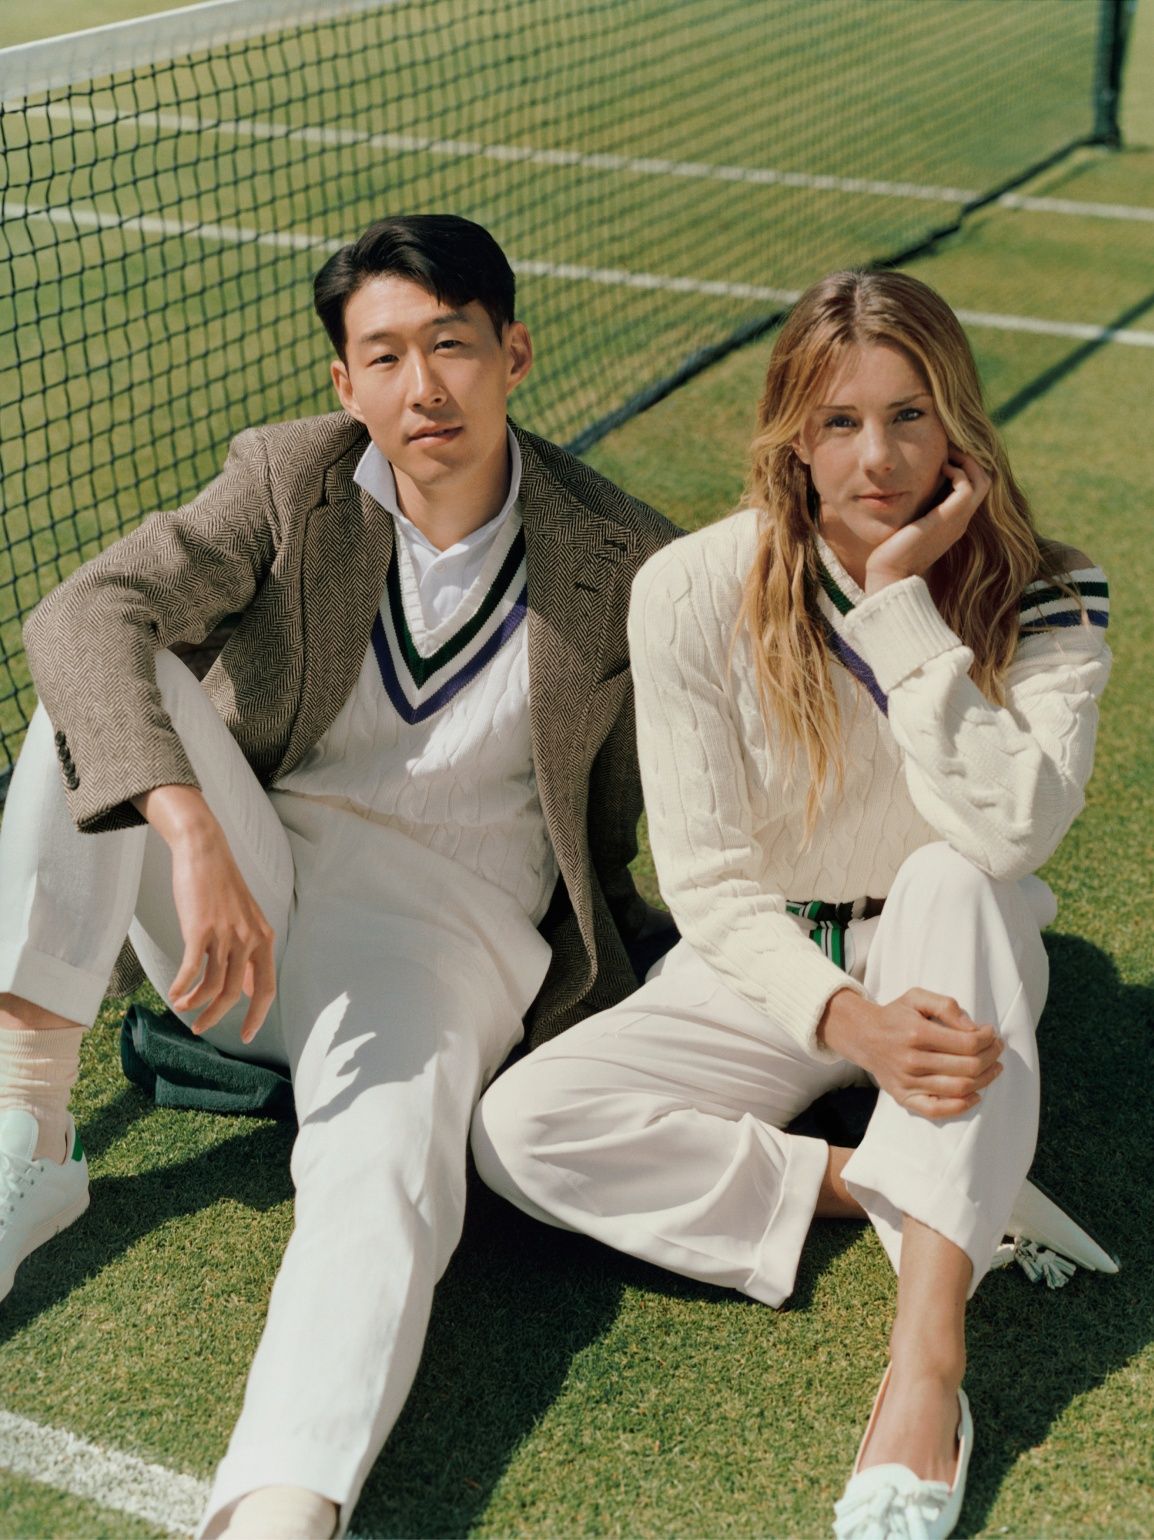 Dressed to Serve: Ralph Lauren's history as the official Wimbledon